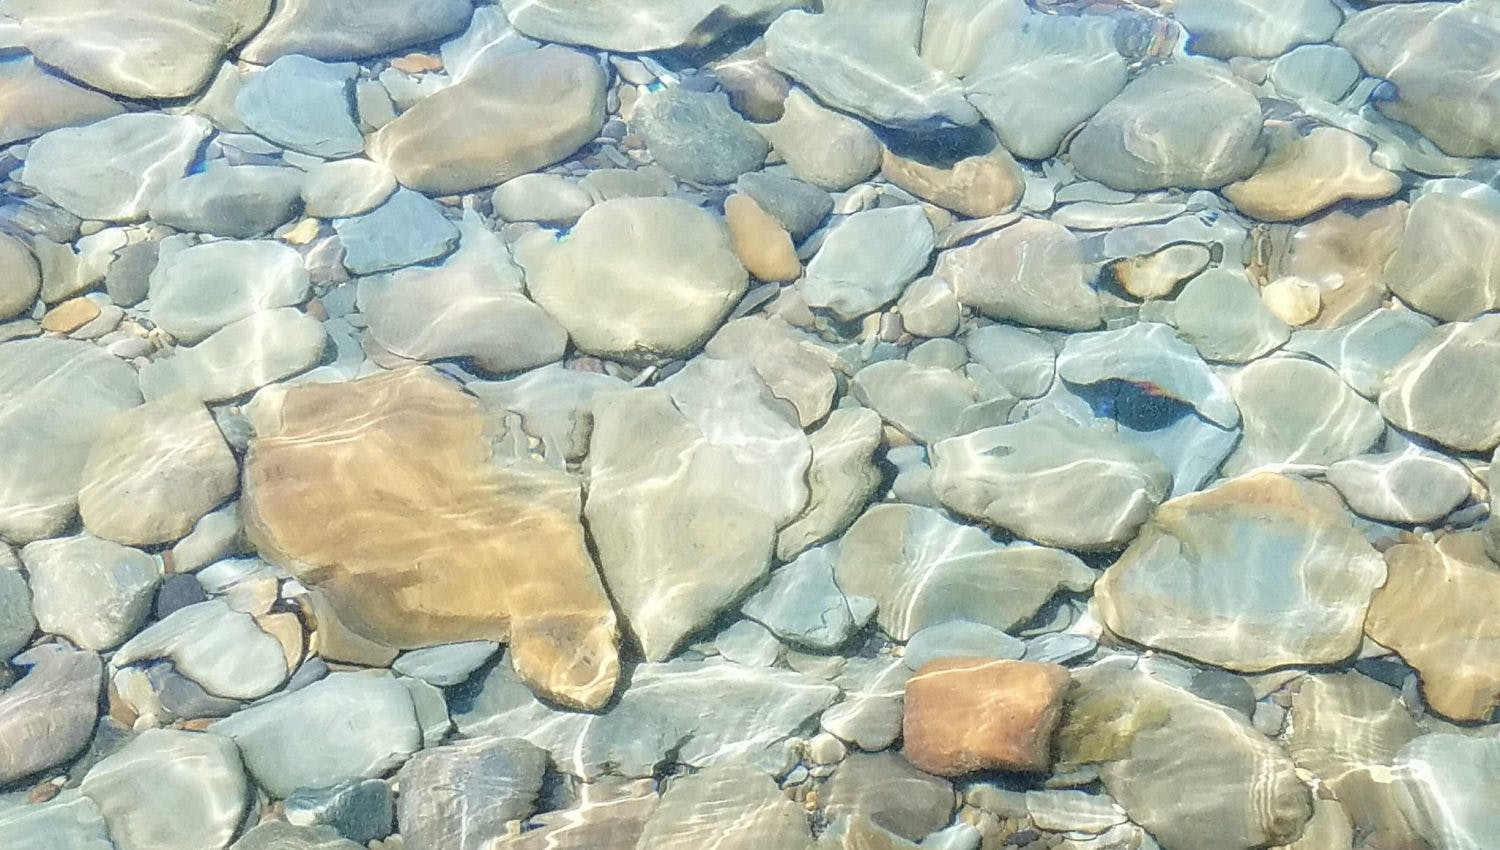 Clear & transparent water with stones